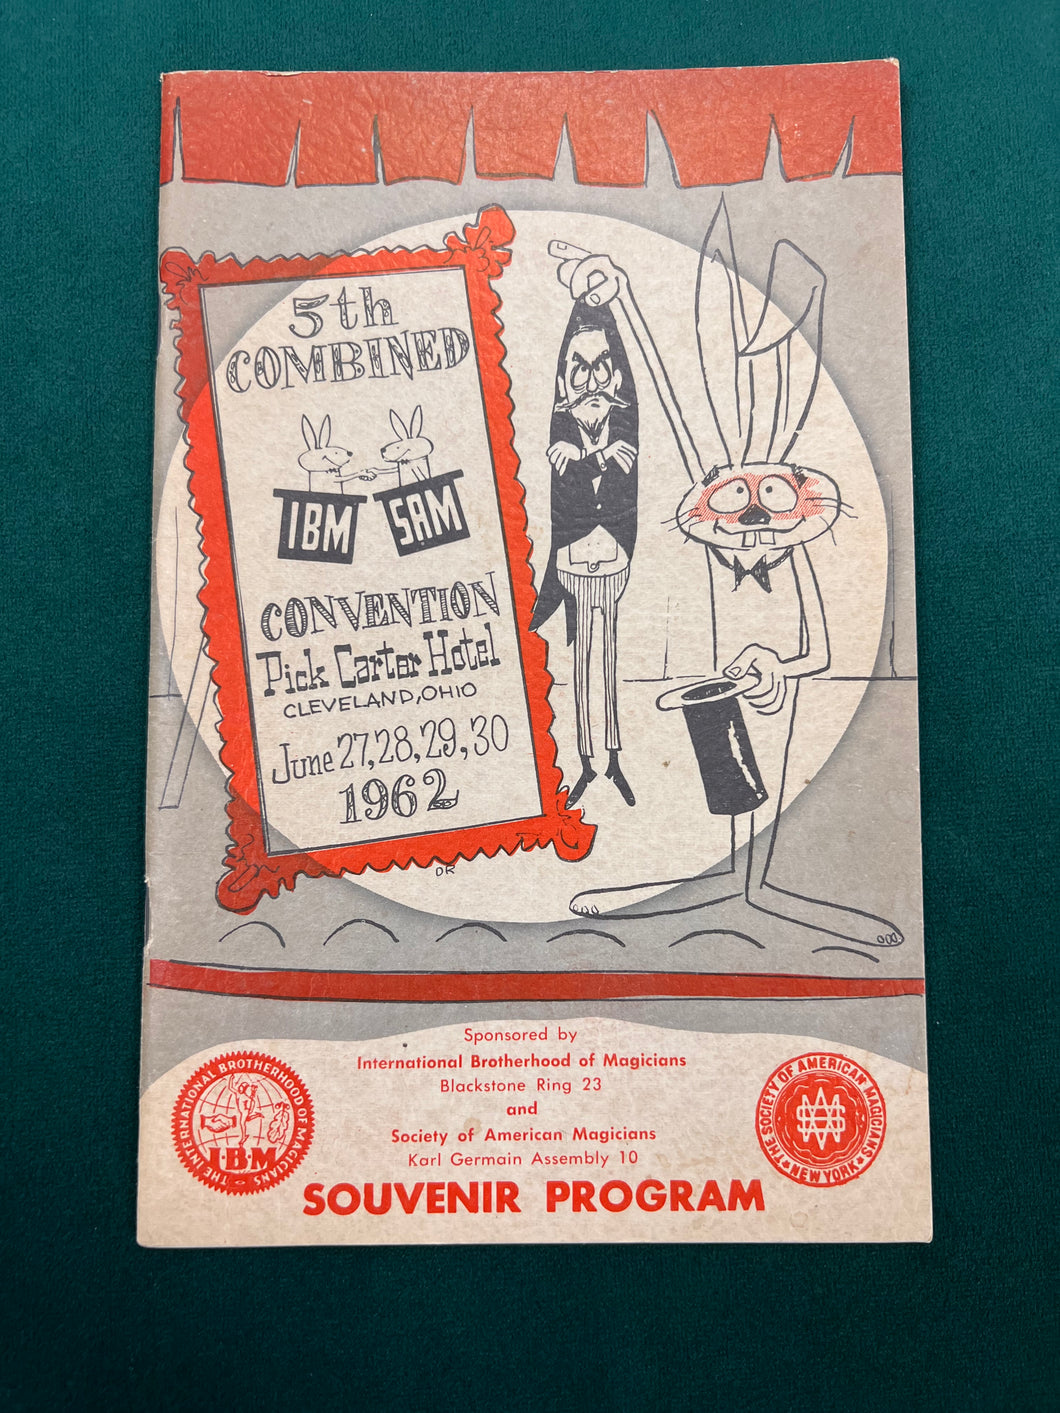 Souvenir Program, the Society of American Magicians Assembly 10